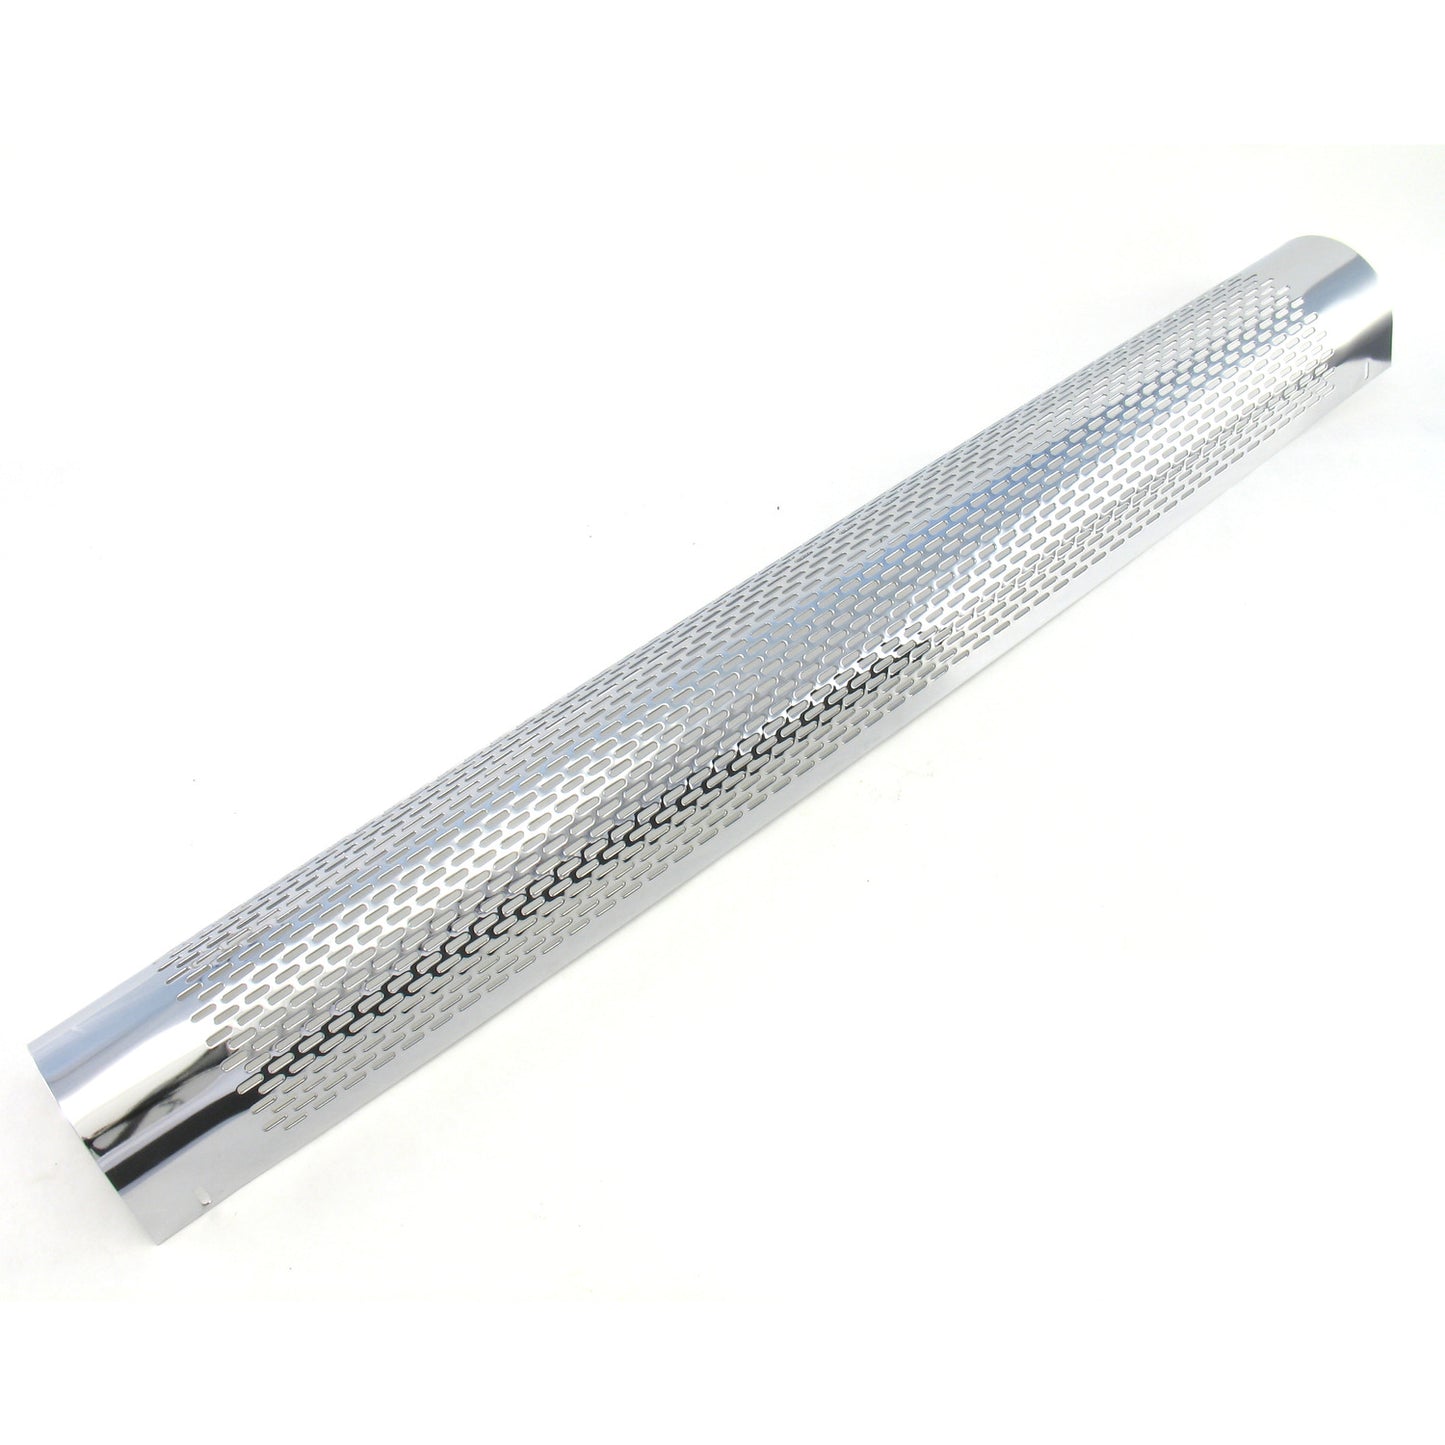 Patriot Exhaust H7454 Heat Shield 70 and 80 Inch Chrome